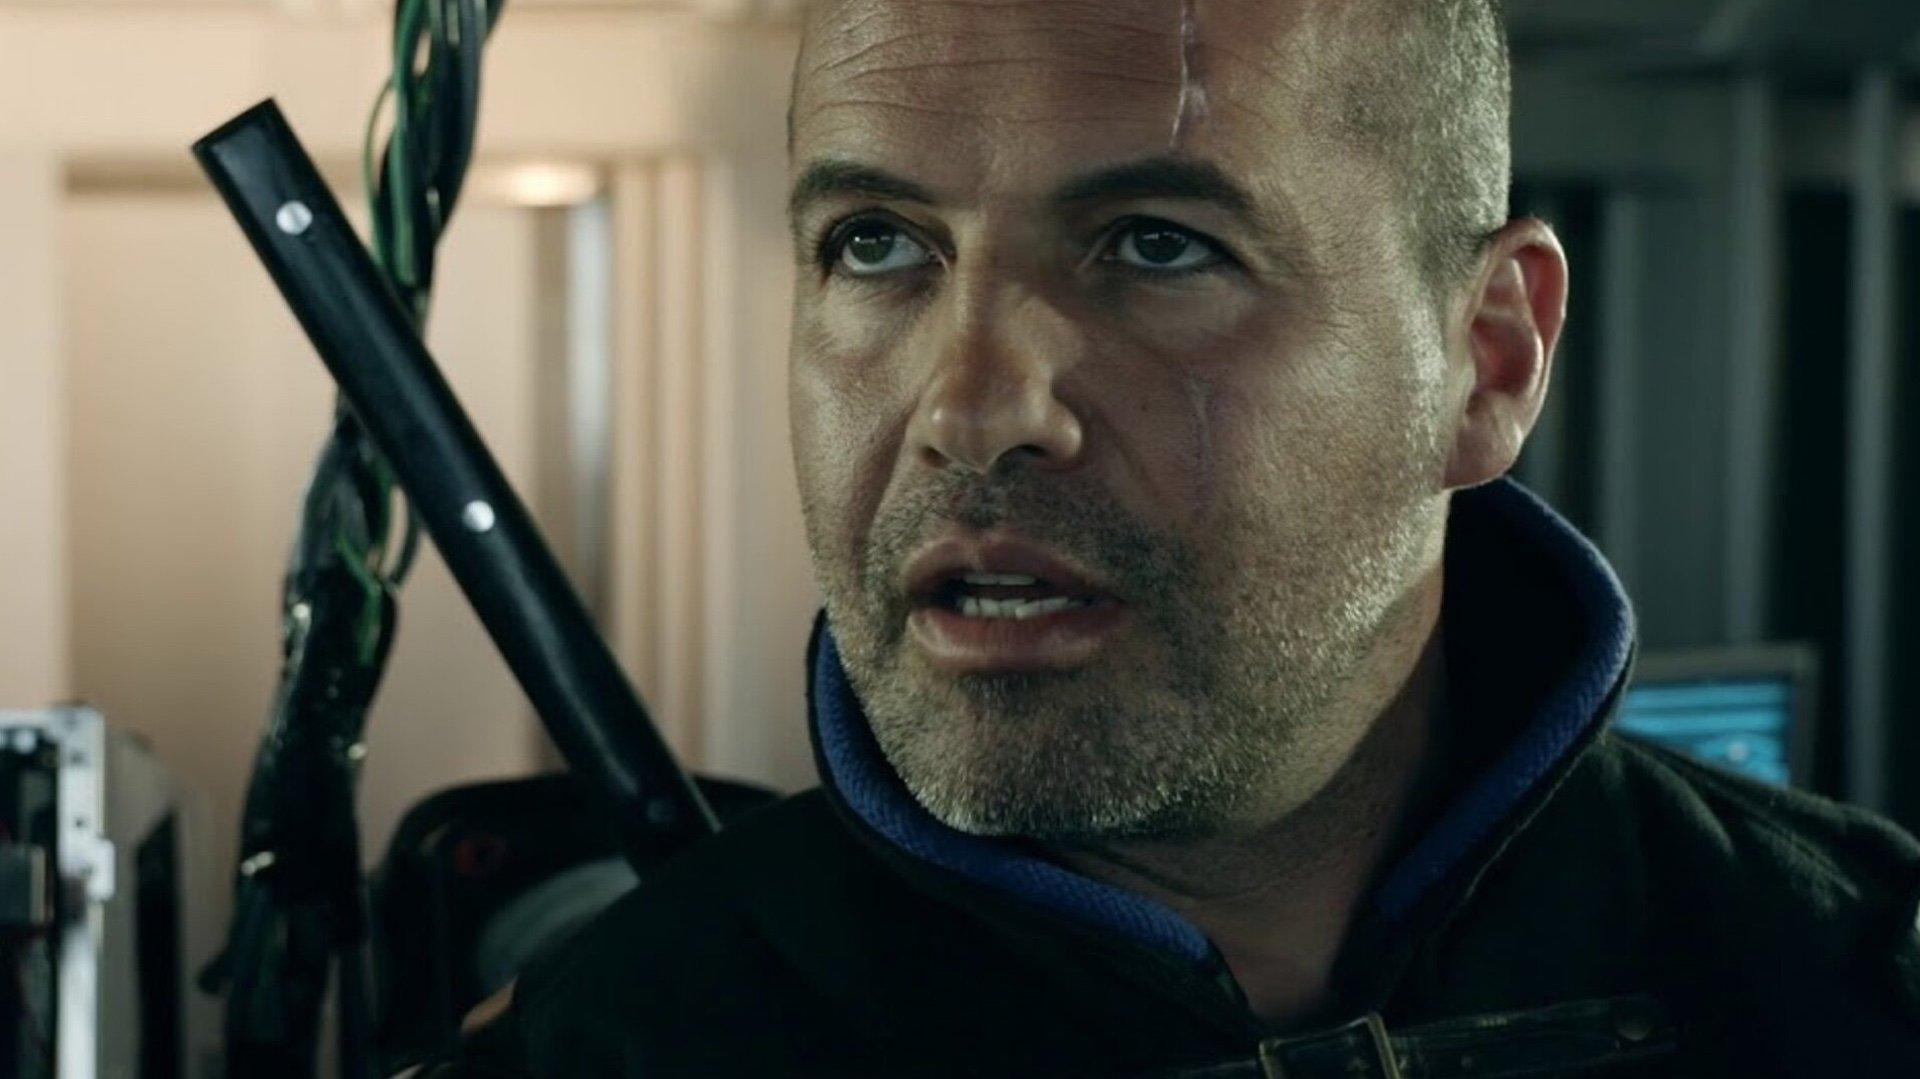 Billy Zane is Set To Star in a New Action Film TAKEOVER From The